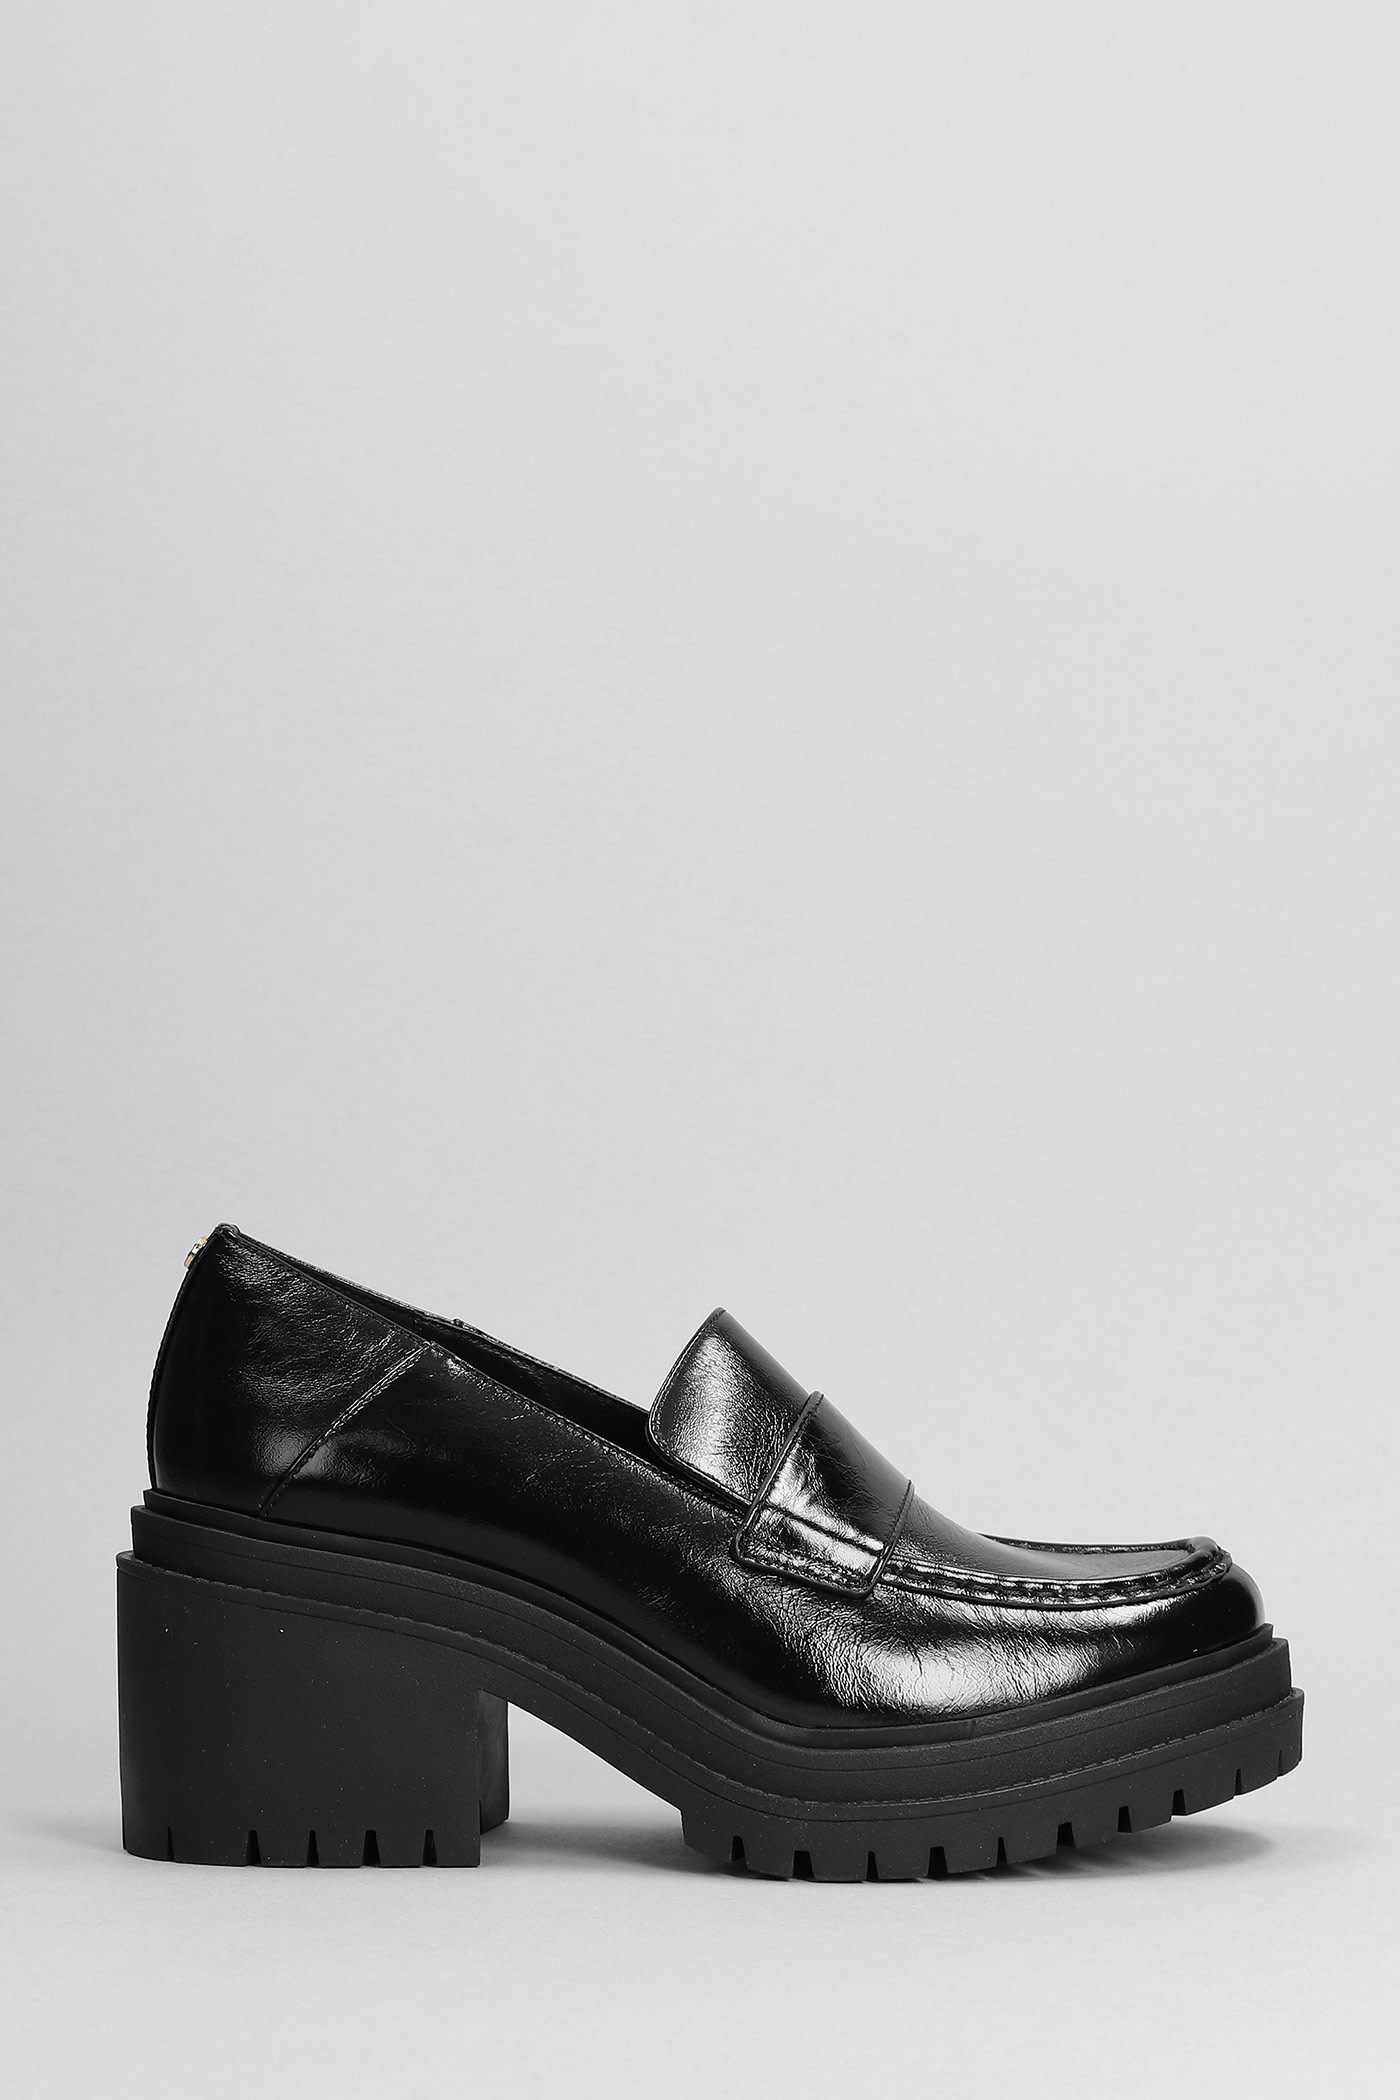 MICHAEL KORS ROCCO LOAFERS IN BLACK LEATHER